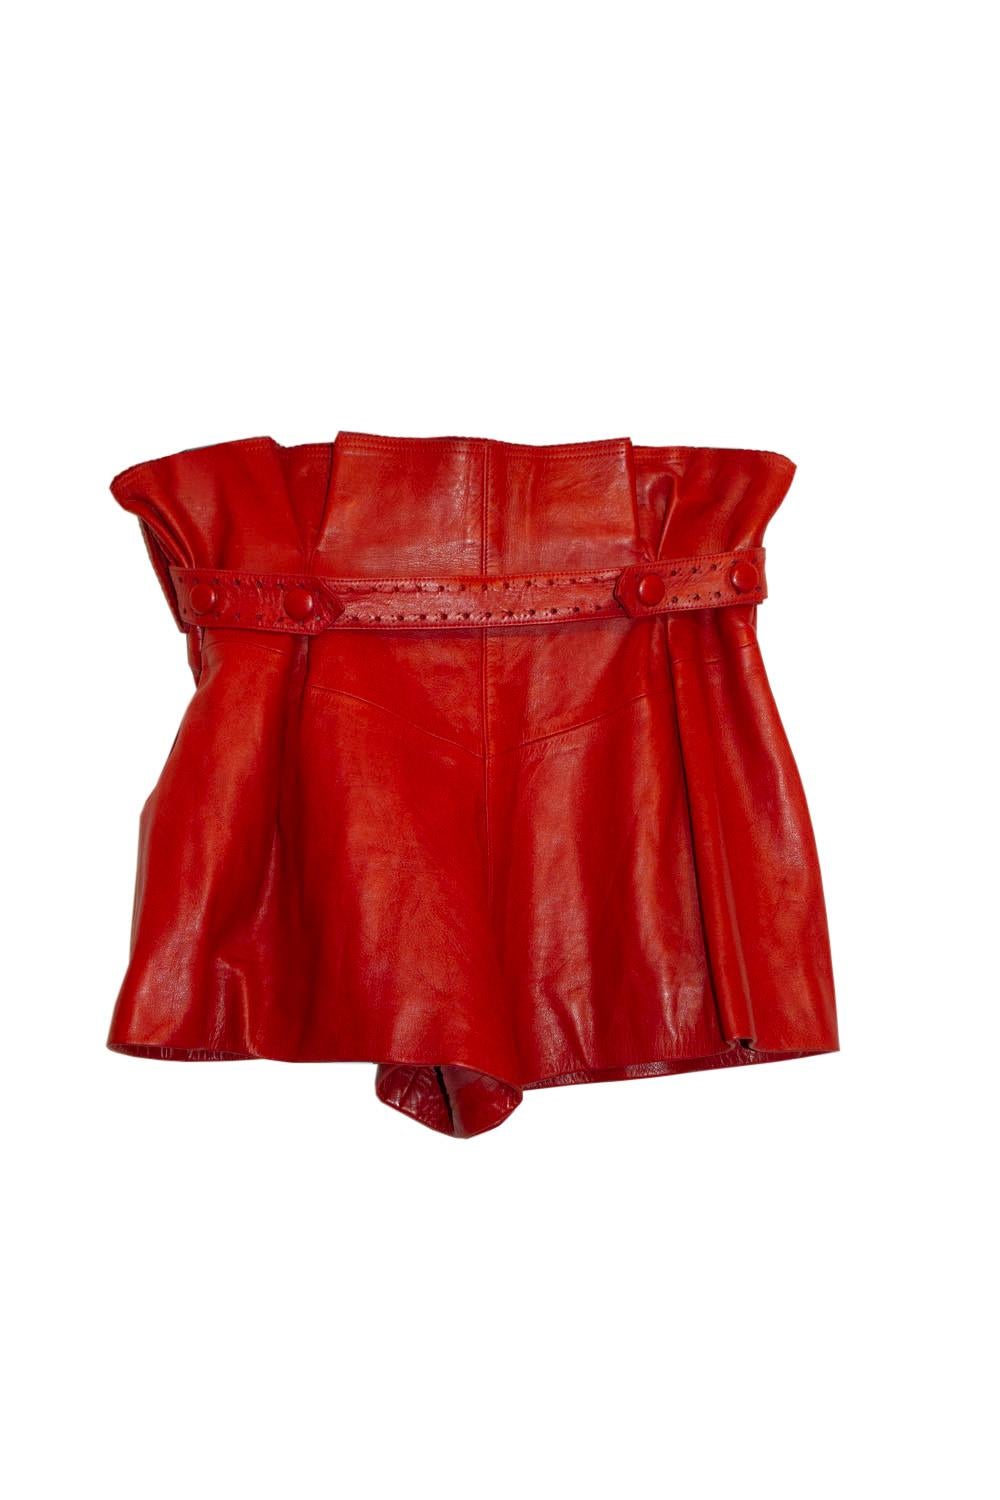 Vintage Chloe Red Leather Shorts For Sale 1